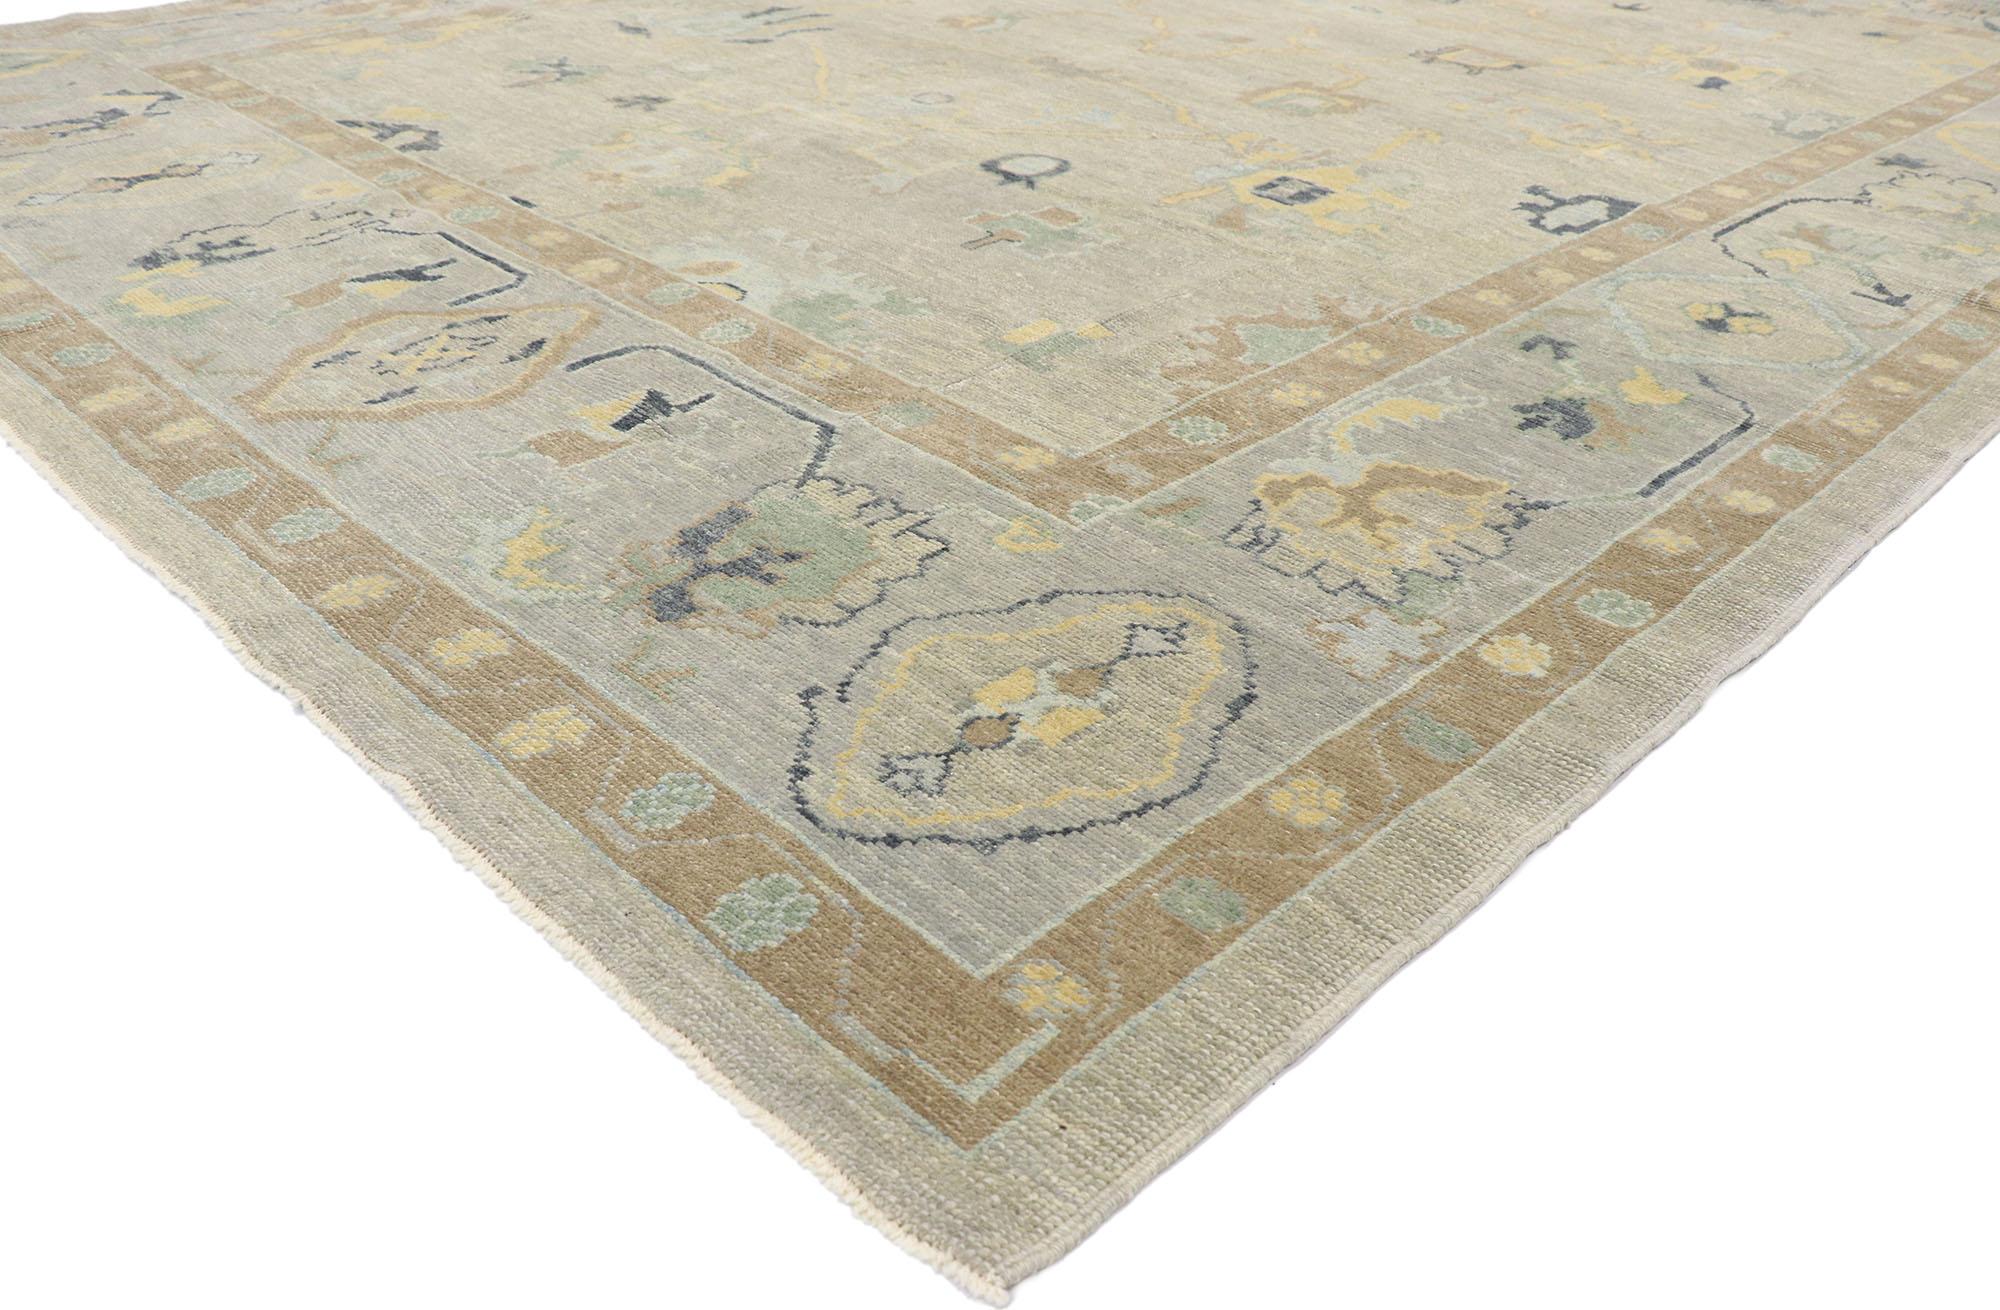 53498 new contemporary Turkish Oushak rug with modern Transitional style. Blending elements from the modern world with soft colors, this hand knotted wool contemporary Turkish Oushak rug will boost the coziness factor in nearly any space. It